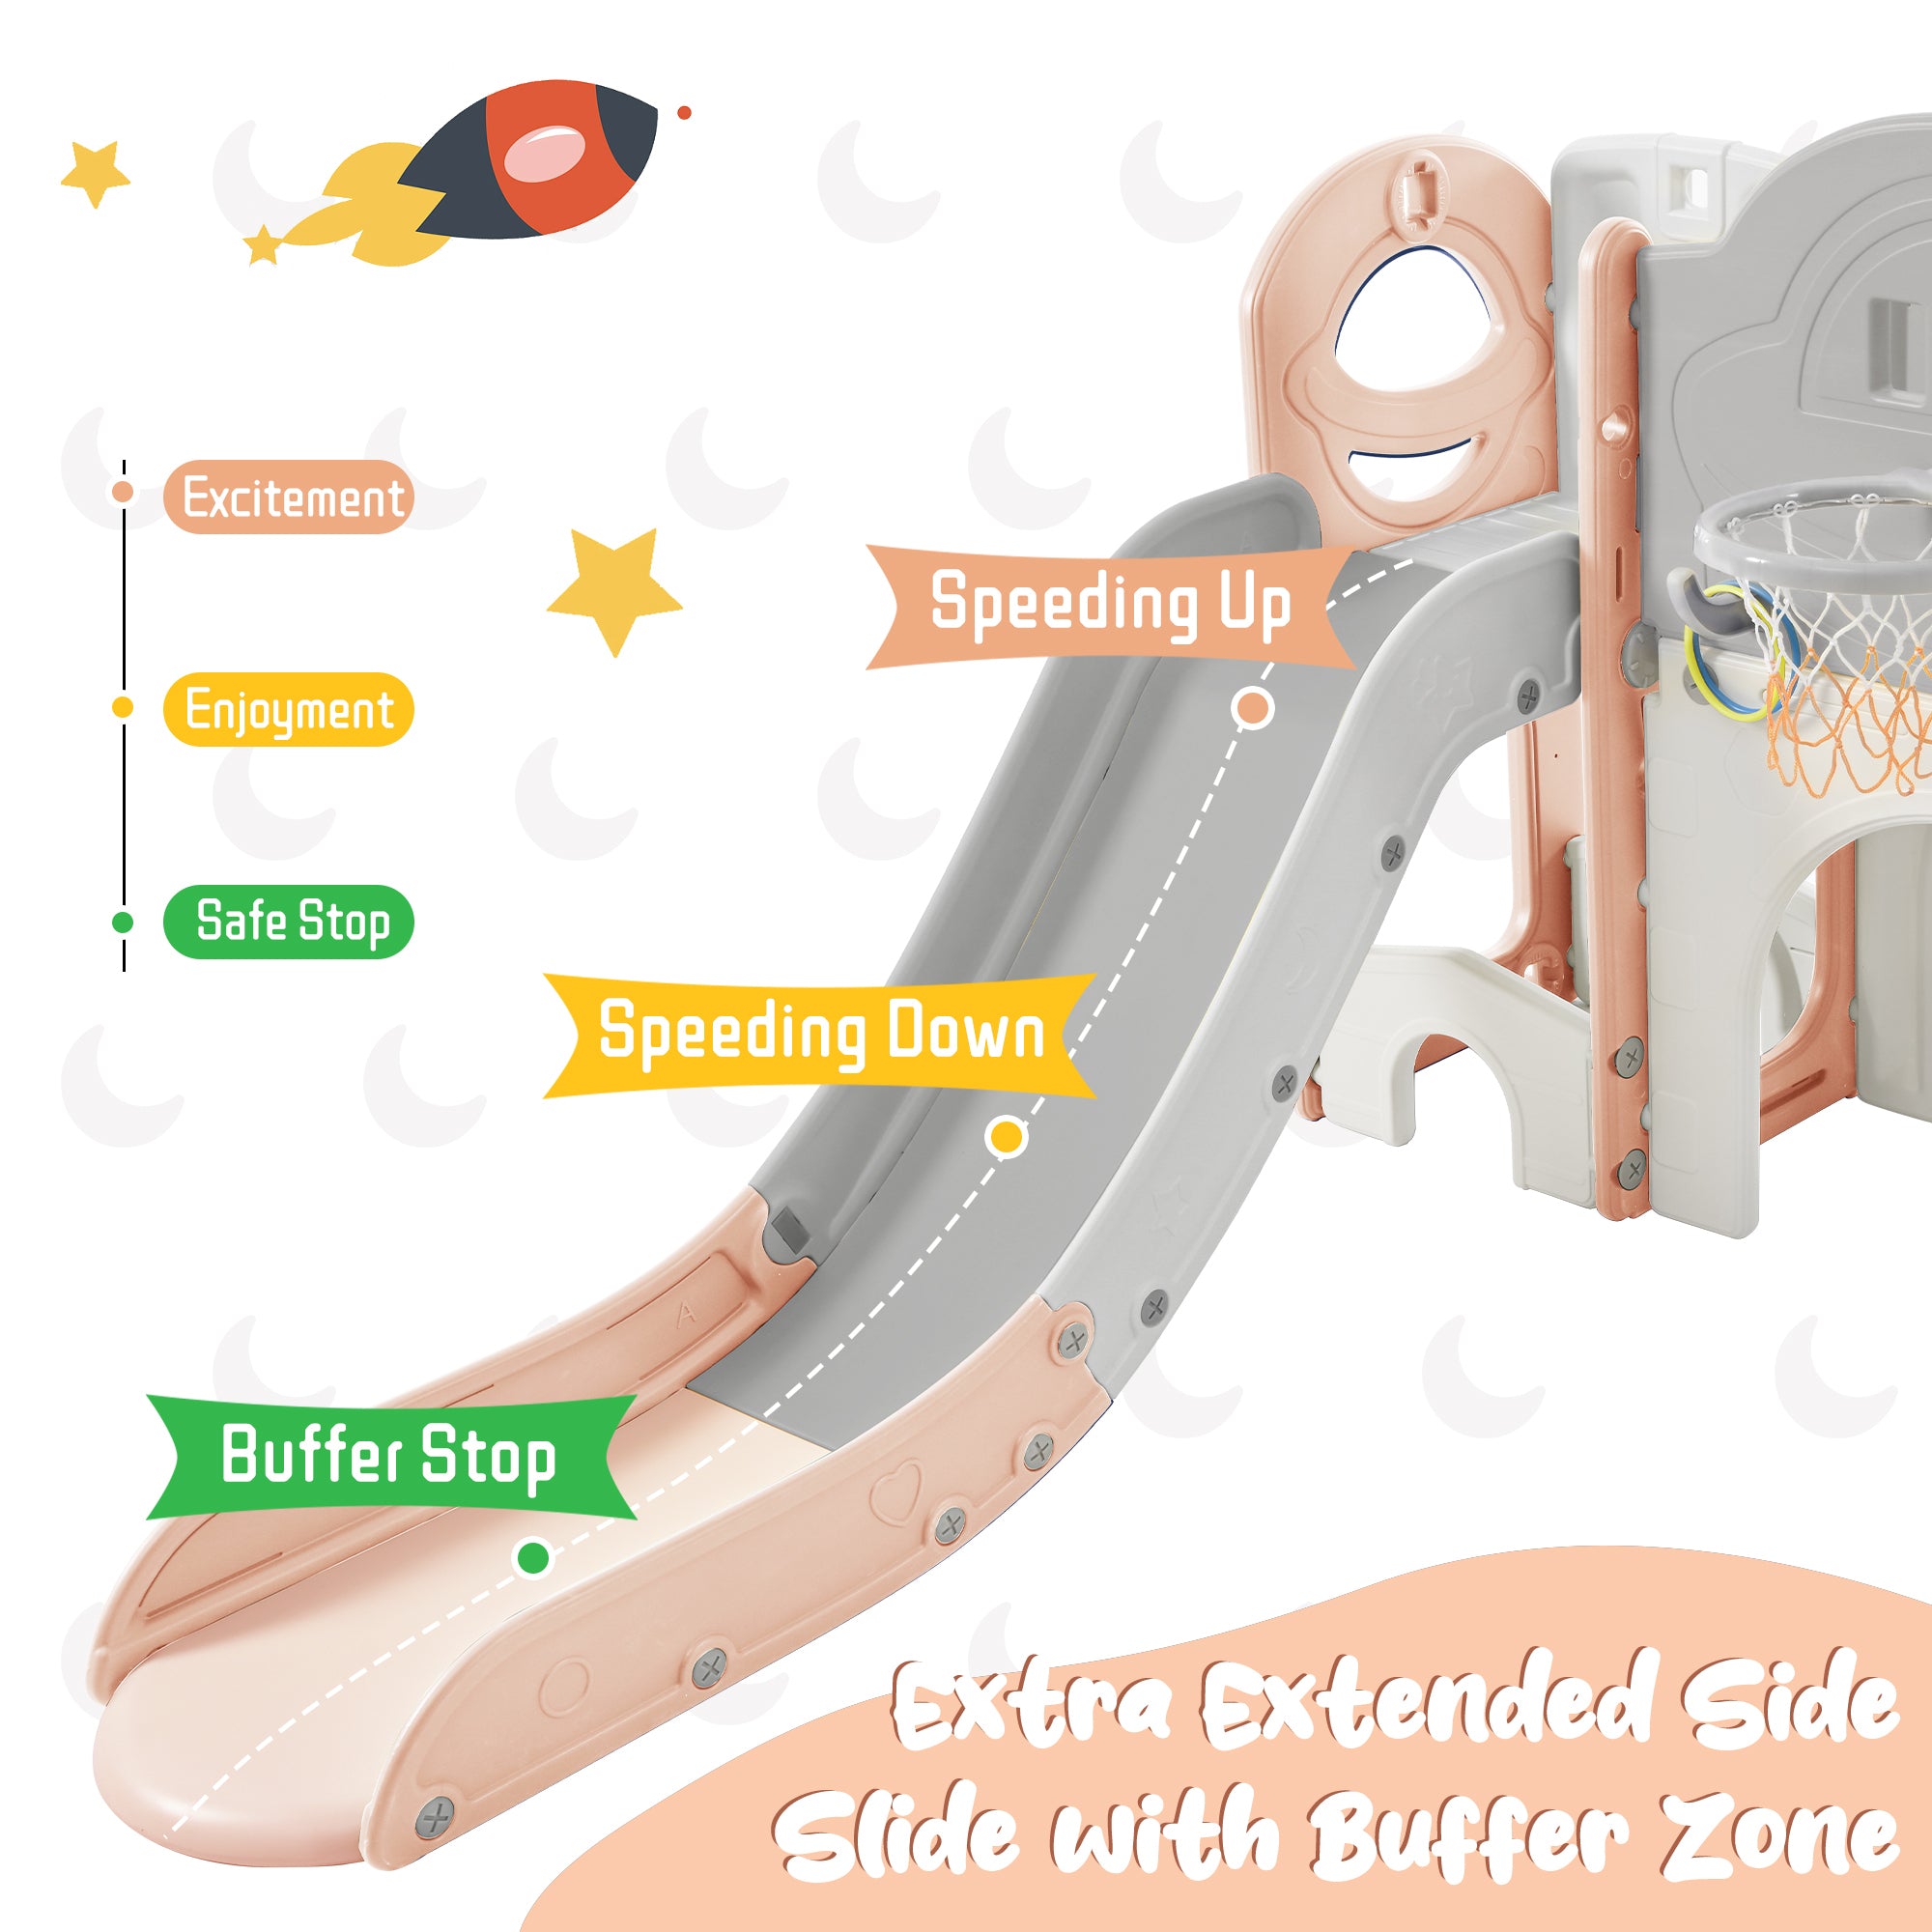 Kids Slide Playset Structure 9 in 1, Freestanding Spaceship Set with Slide, Arch Tunnel, Ring Toss, Drawing Whiteboardl and Basketball Hoop for Toddlers, Kids Climbers Playground